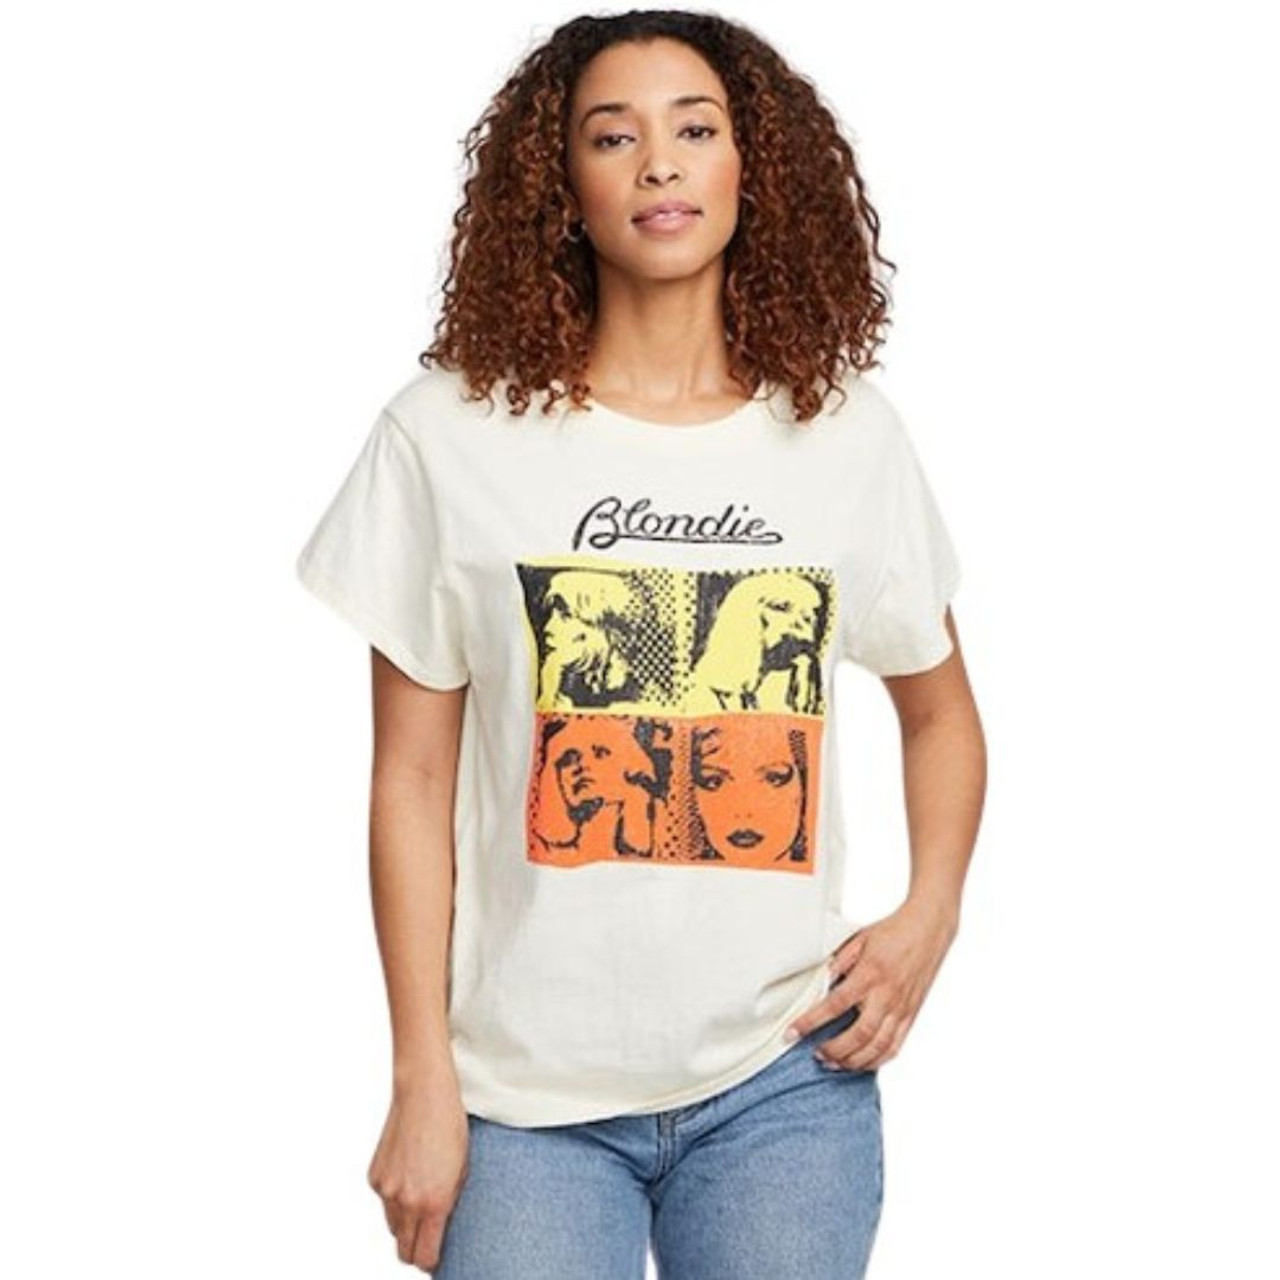 Blondie Debbie Harry Poster Images Women's T-shirt by Chaser